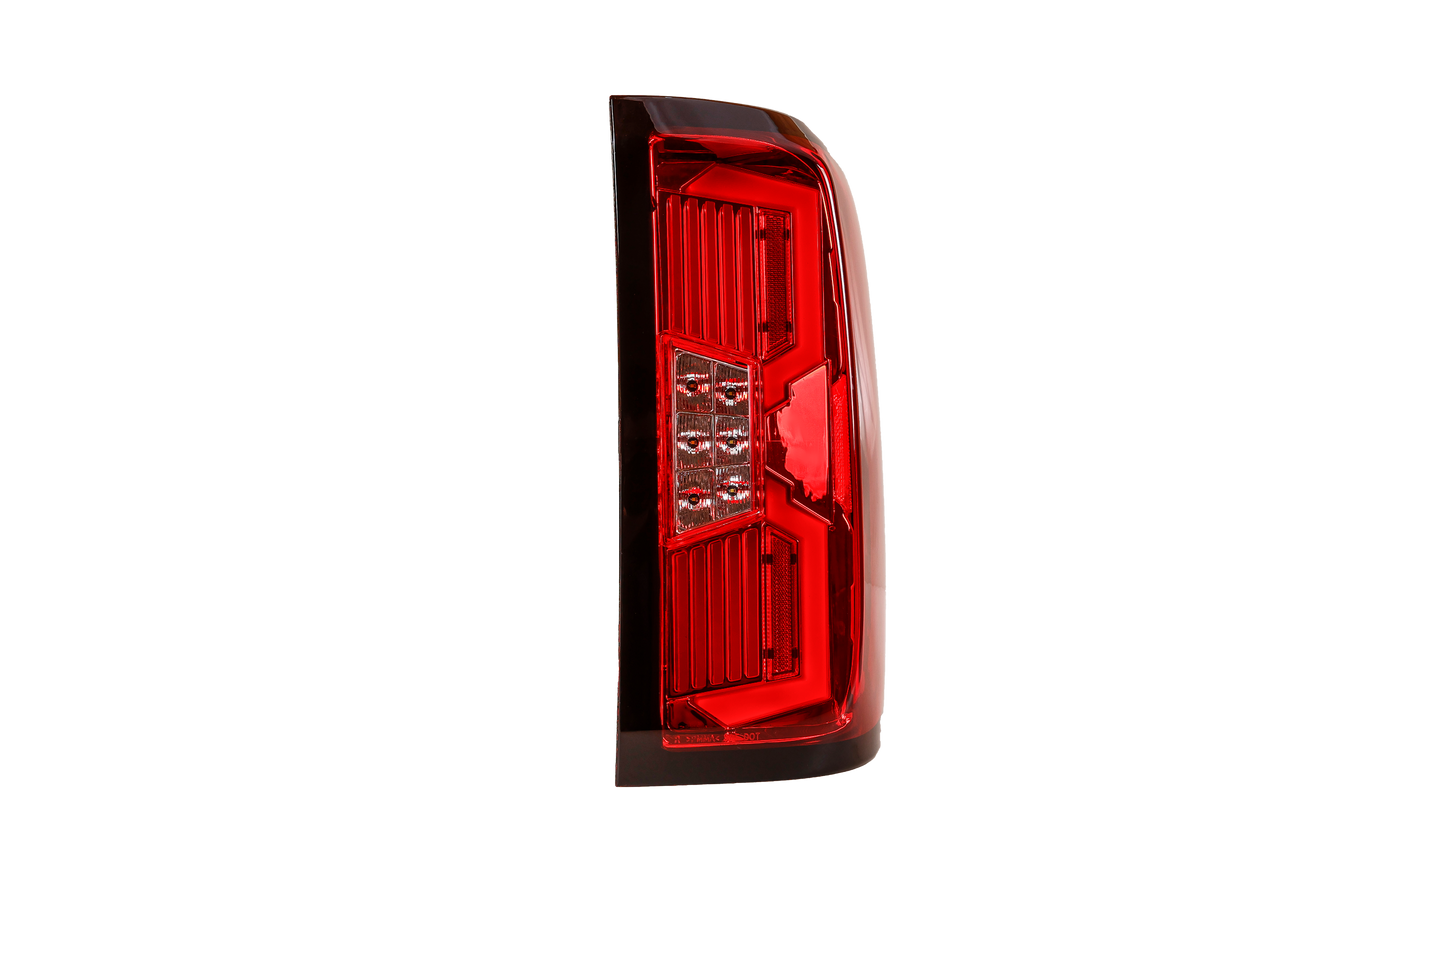 RENEGADE 2014-2018 Chevy Silverado 1500, 2500, 3500 LED Sequential Tail light WINJET-CTRNG0686-BS-SQ